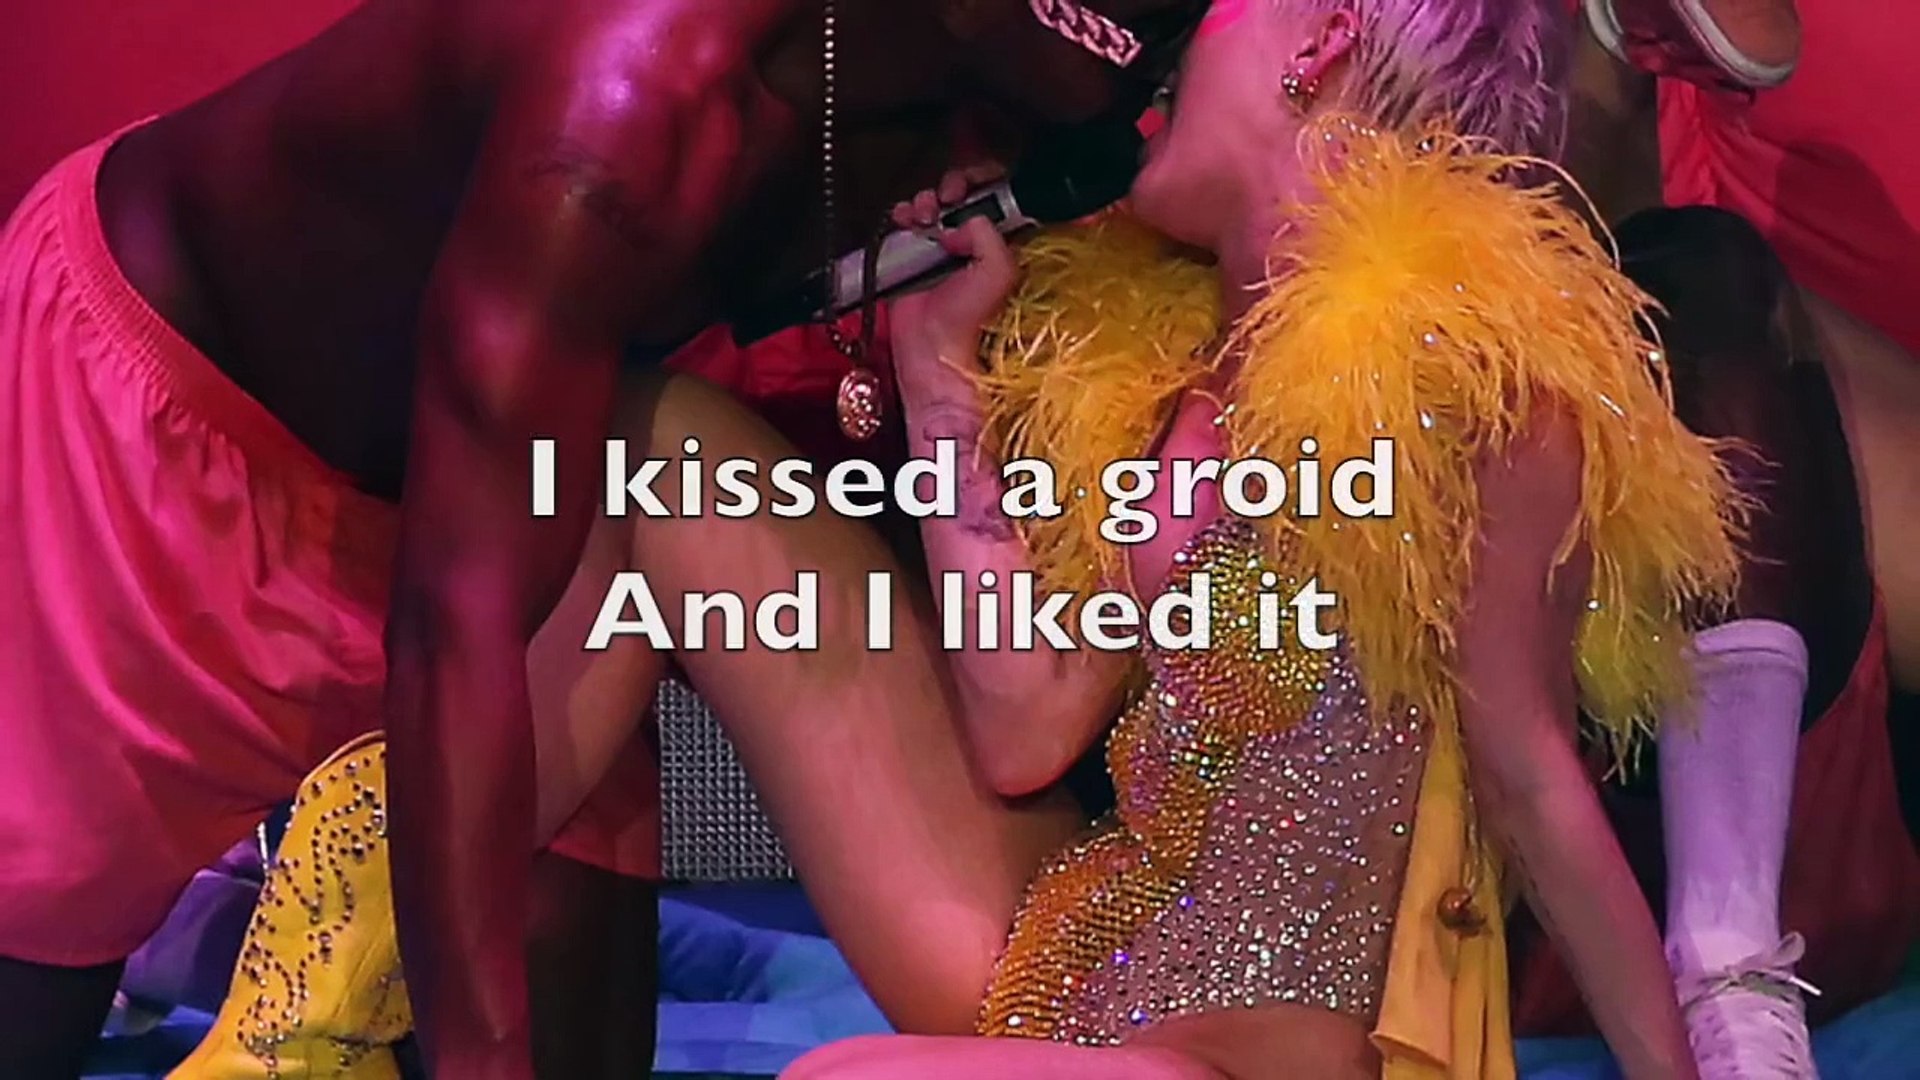 Kissed a Groid-'Kissed a Girl' by Ketty Perry Parody